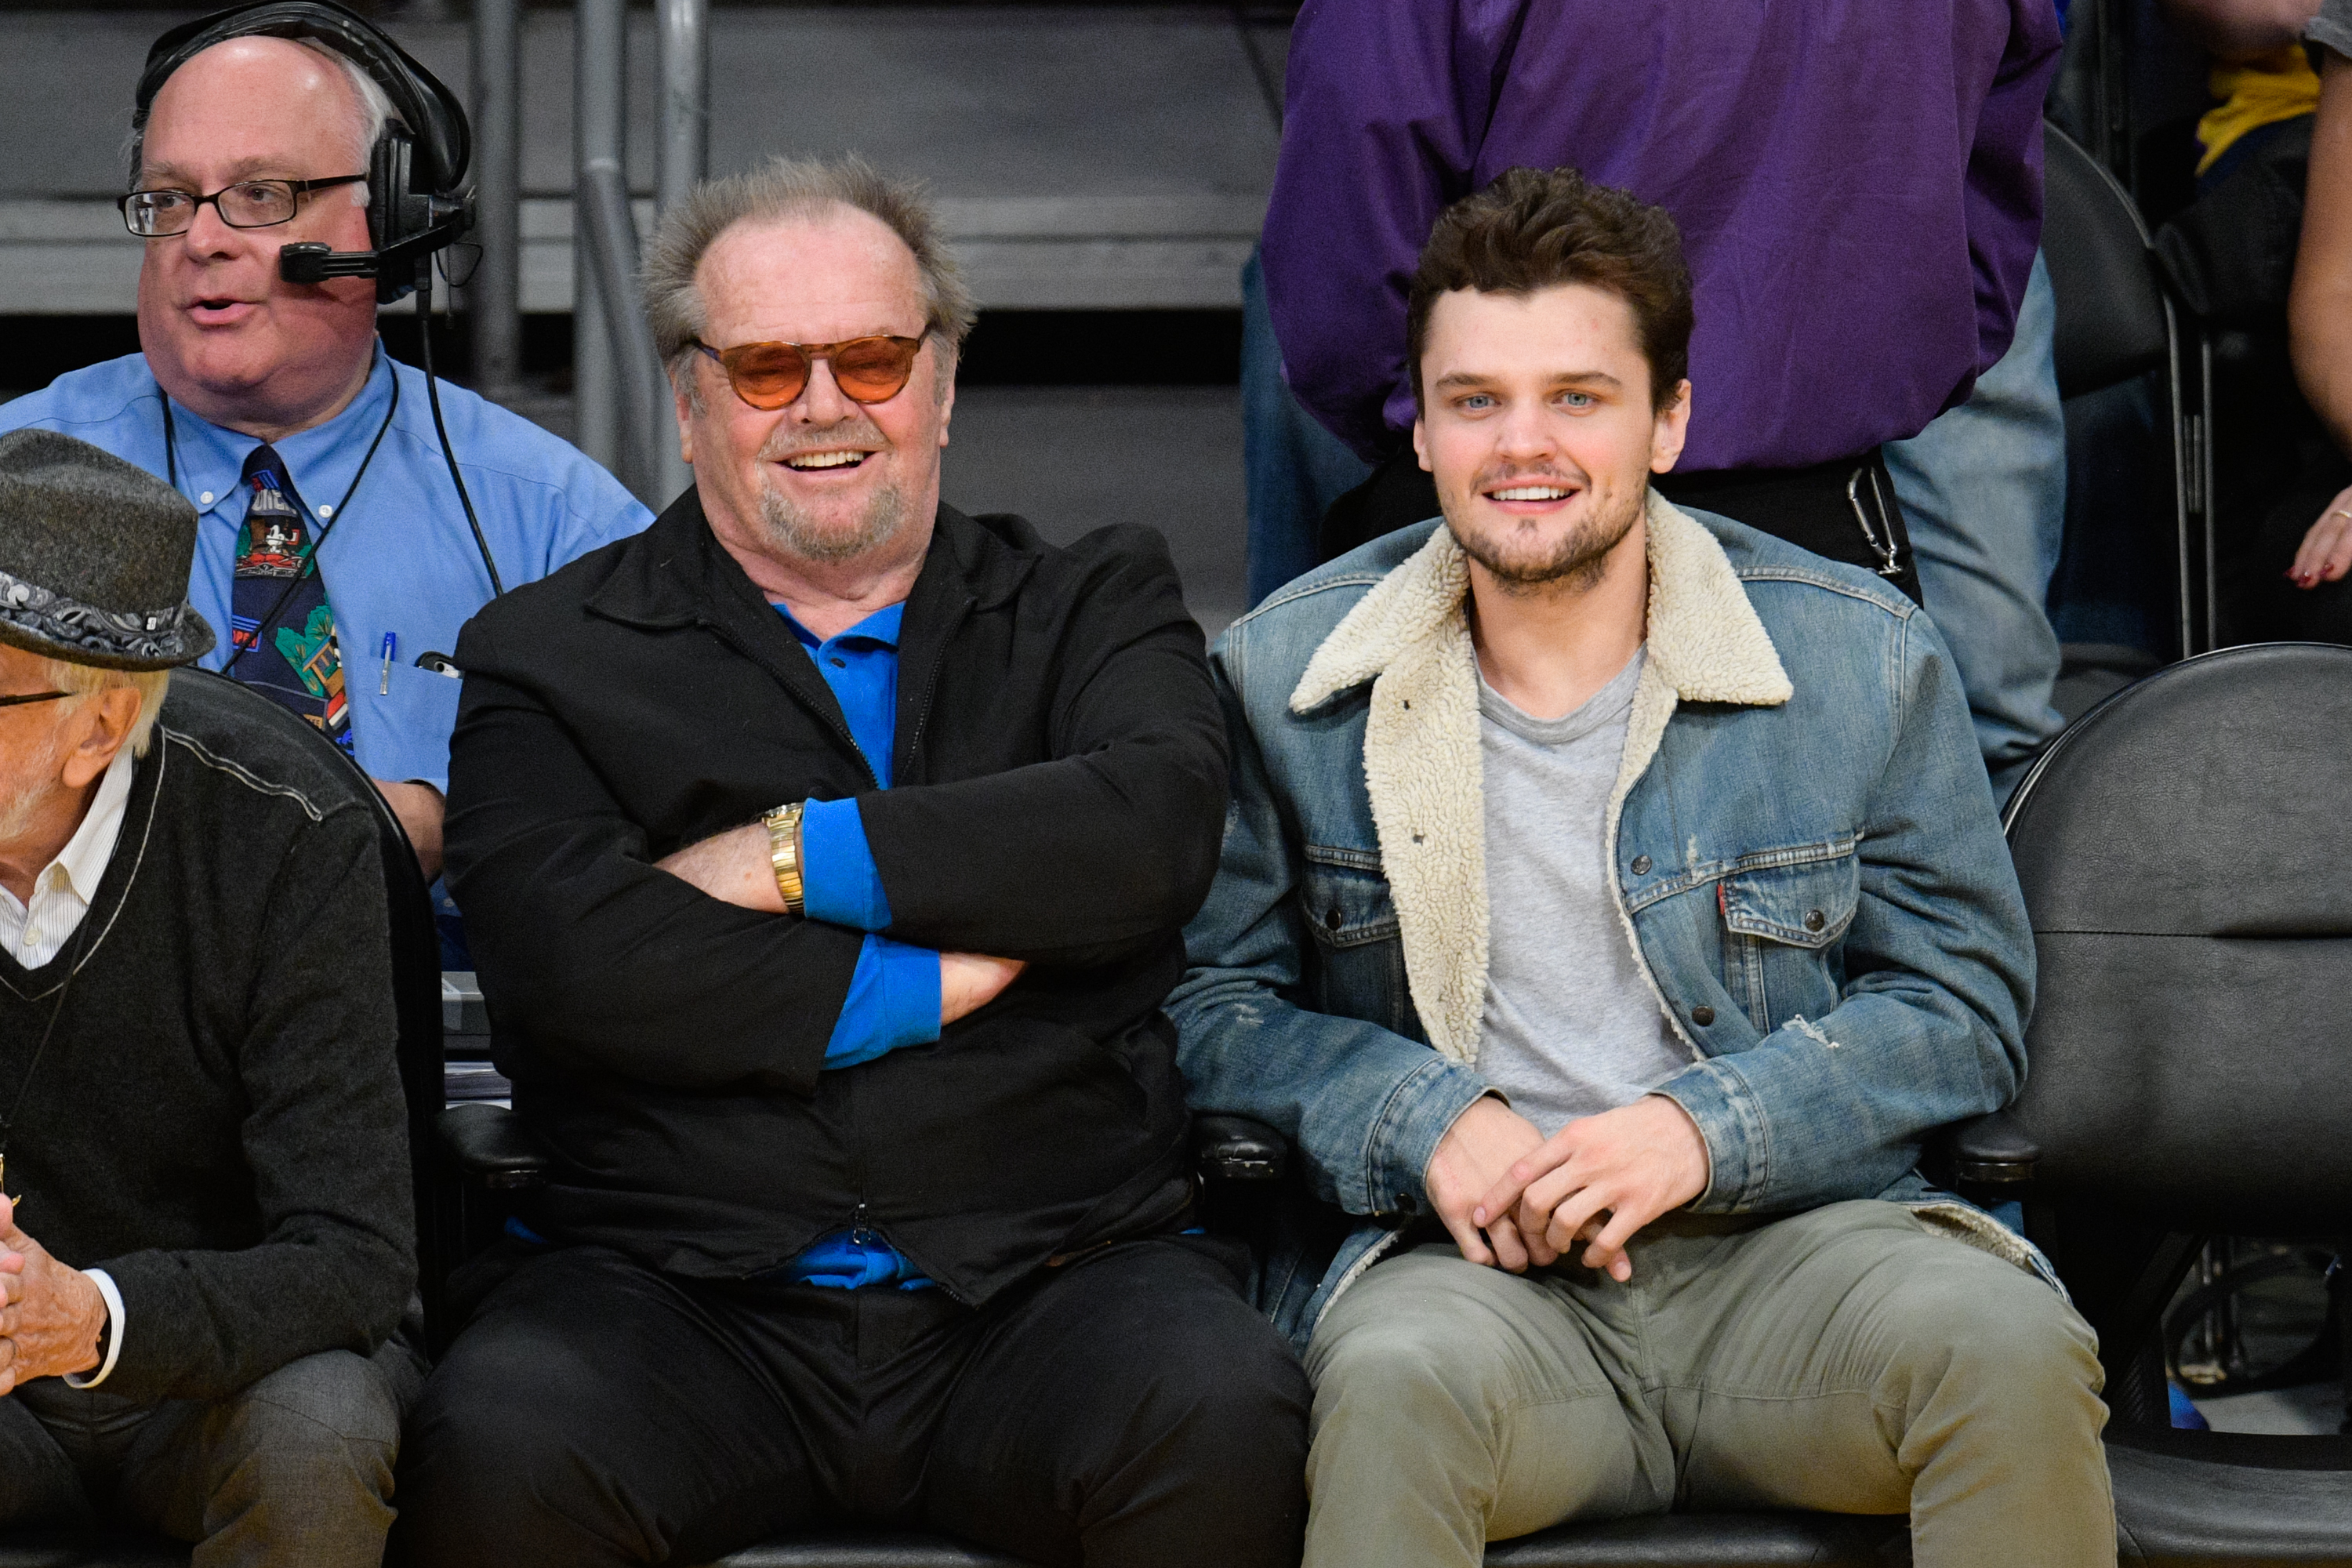 Jack and Ray Nicholson at a basketball game between the Golden State Warriors and the Los Angeles Lakers on November 4, 2016, in Los Angeles, California | Source: Getty Images